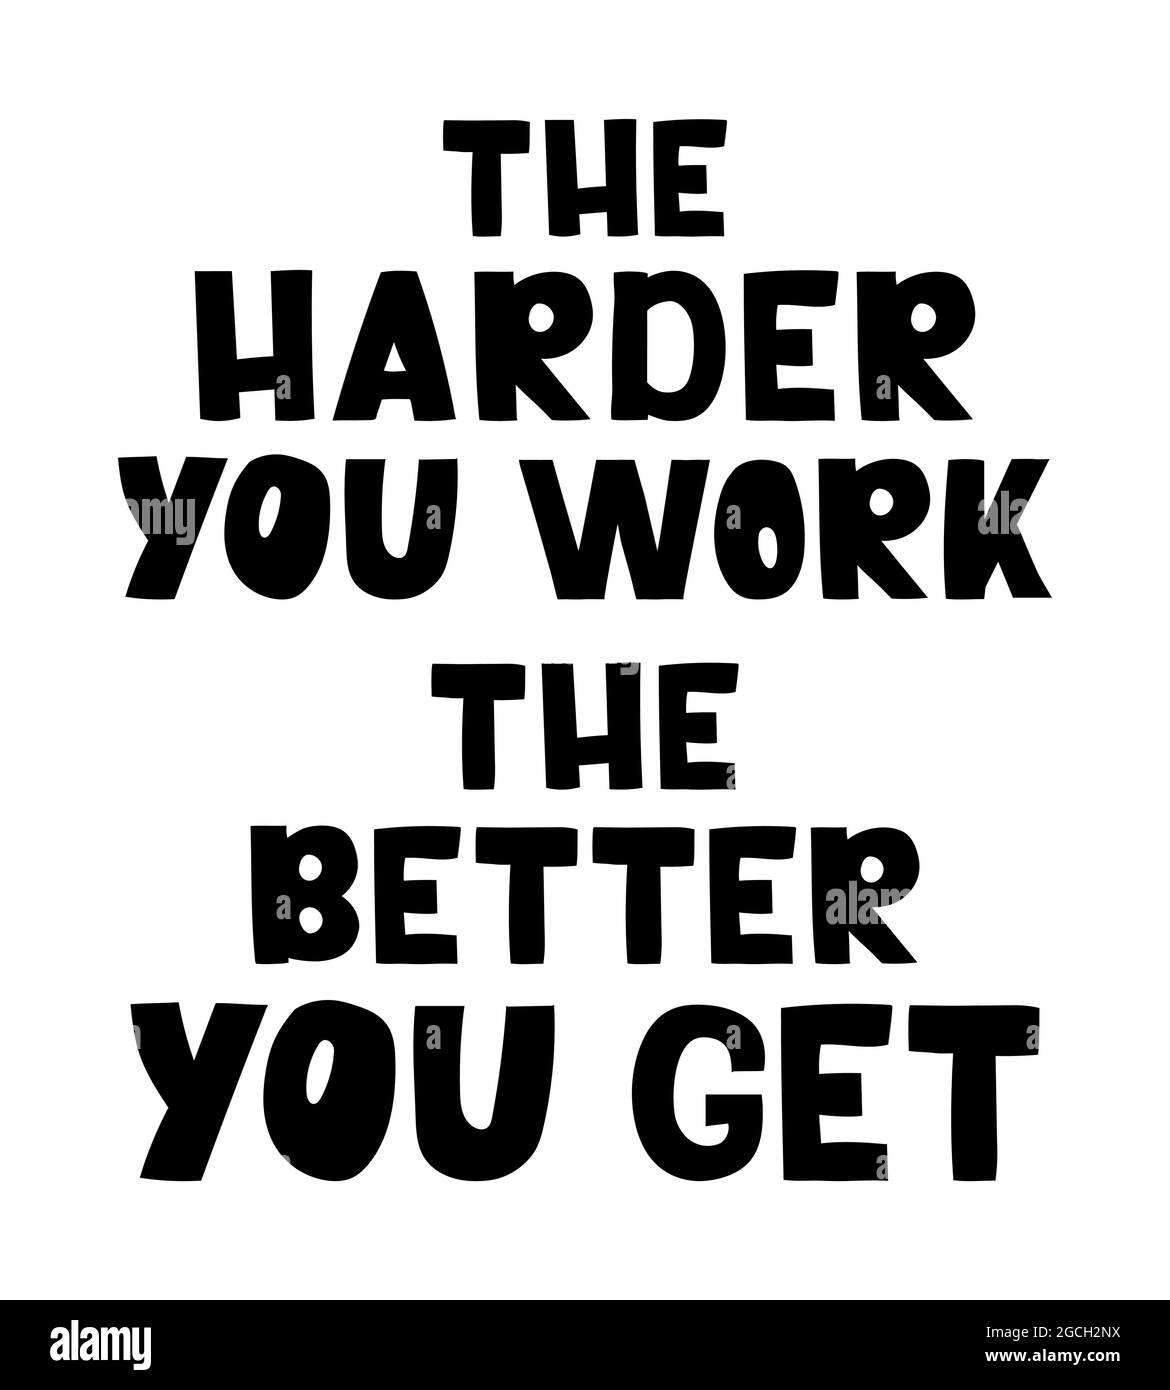 The harder you work, the better you get - hand drawn lettering. Illustration isolated on white background. Motivational phrase, inspiration, positive thinking Stock Vector